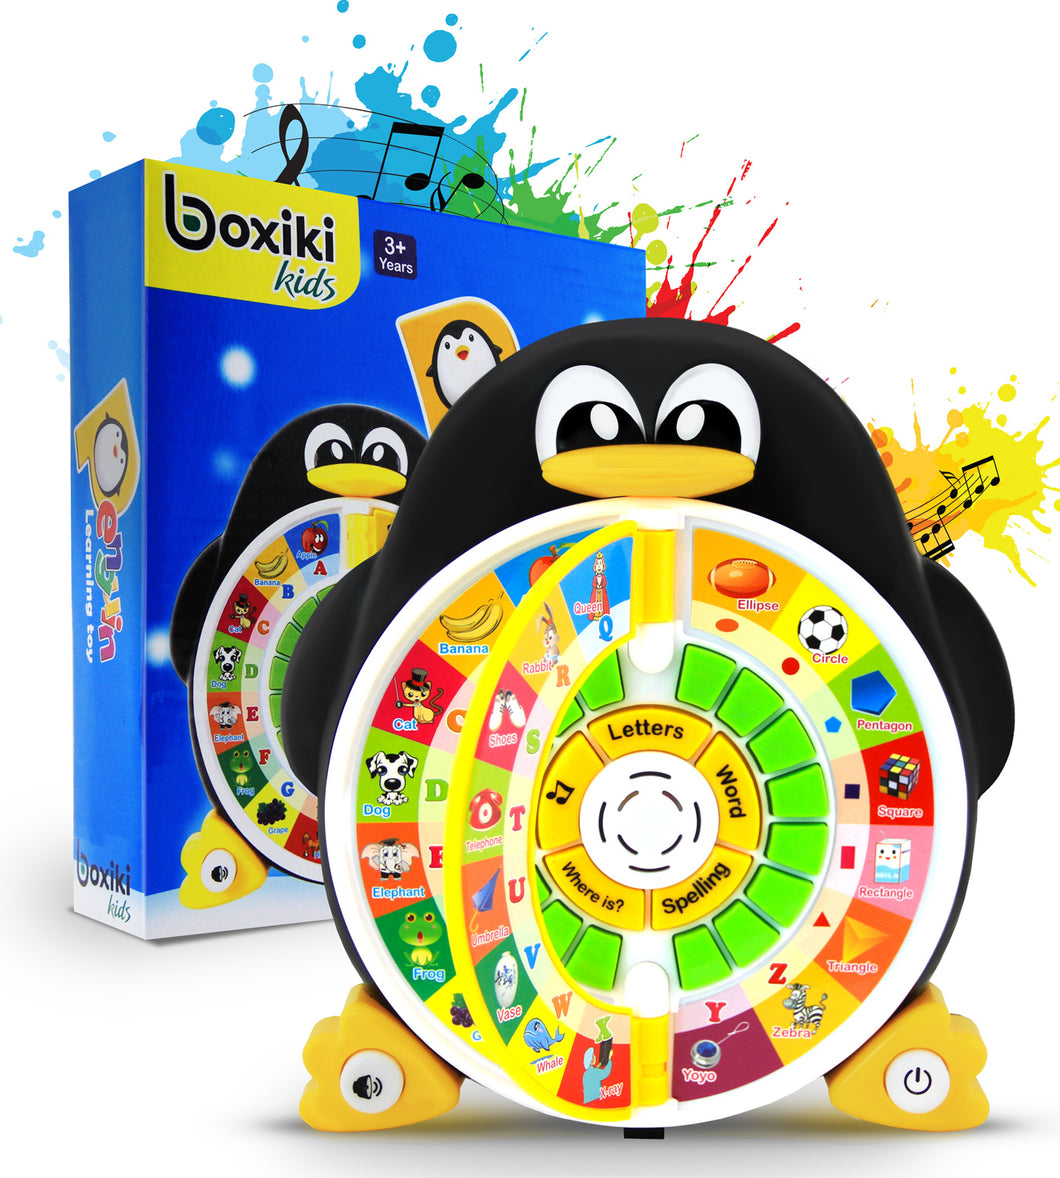 Penguin Power ABC Learning & Educational Toys for Toddlers - Preschool Learning Activities Toys to Learn ABCs, Words, Spelling, Shapes, Quiz & Songs - Learning Toys for 3+ Year Olds Boys and Girls